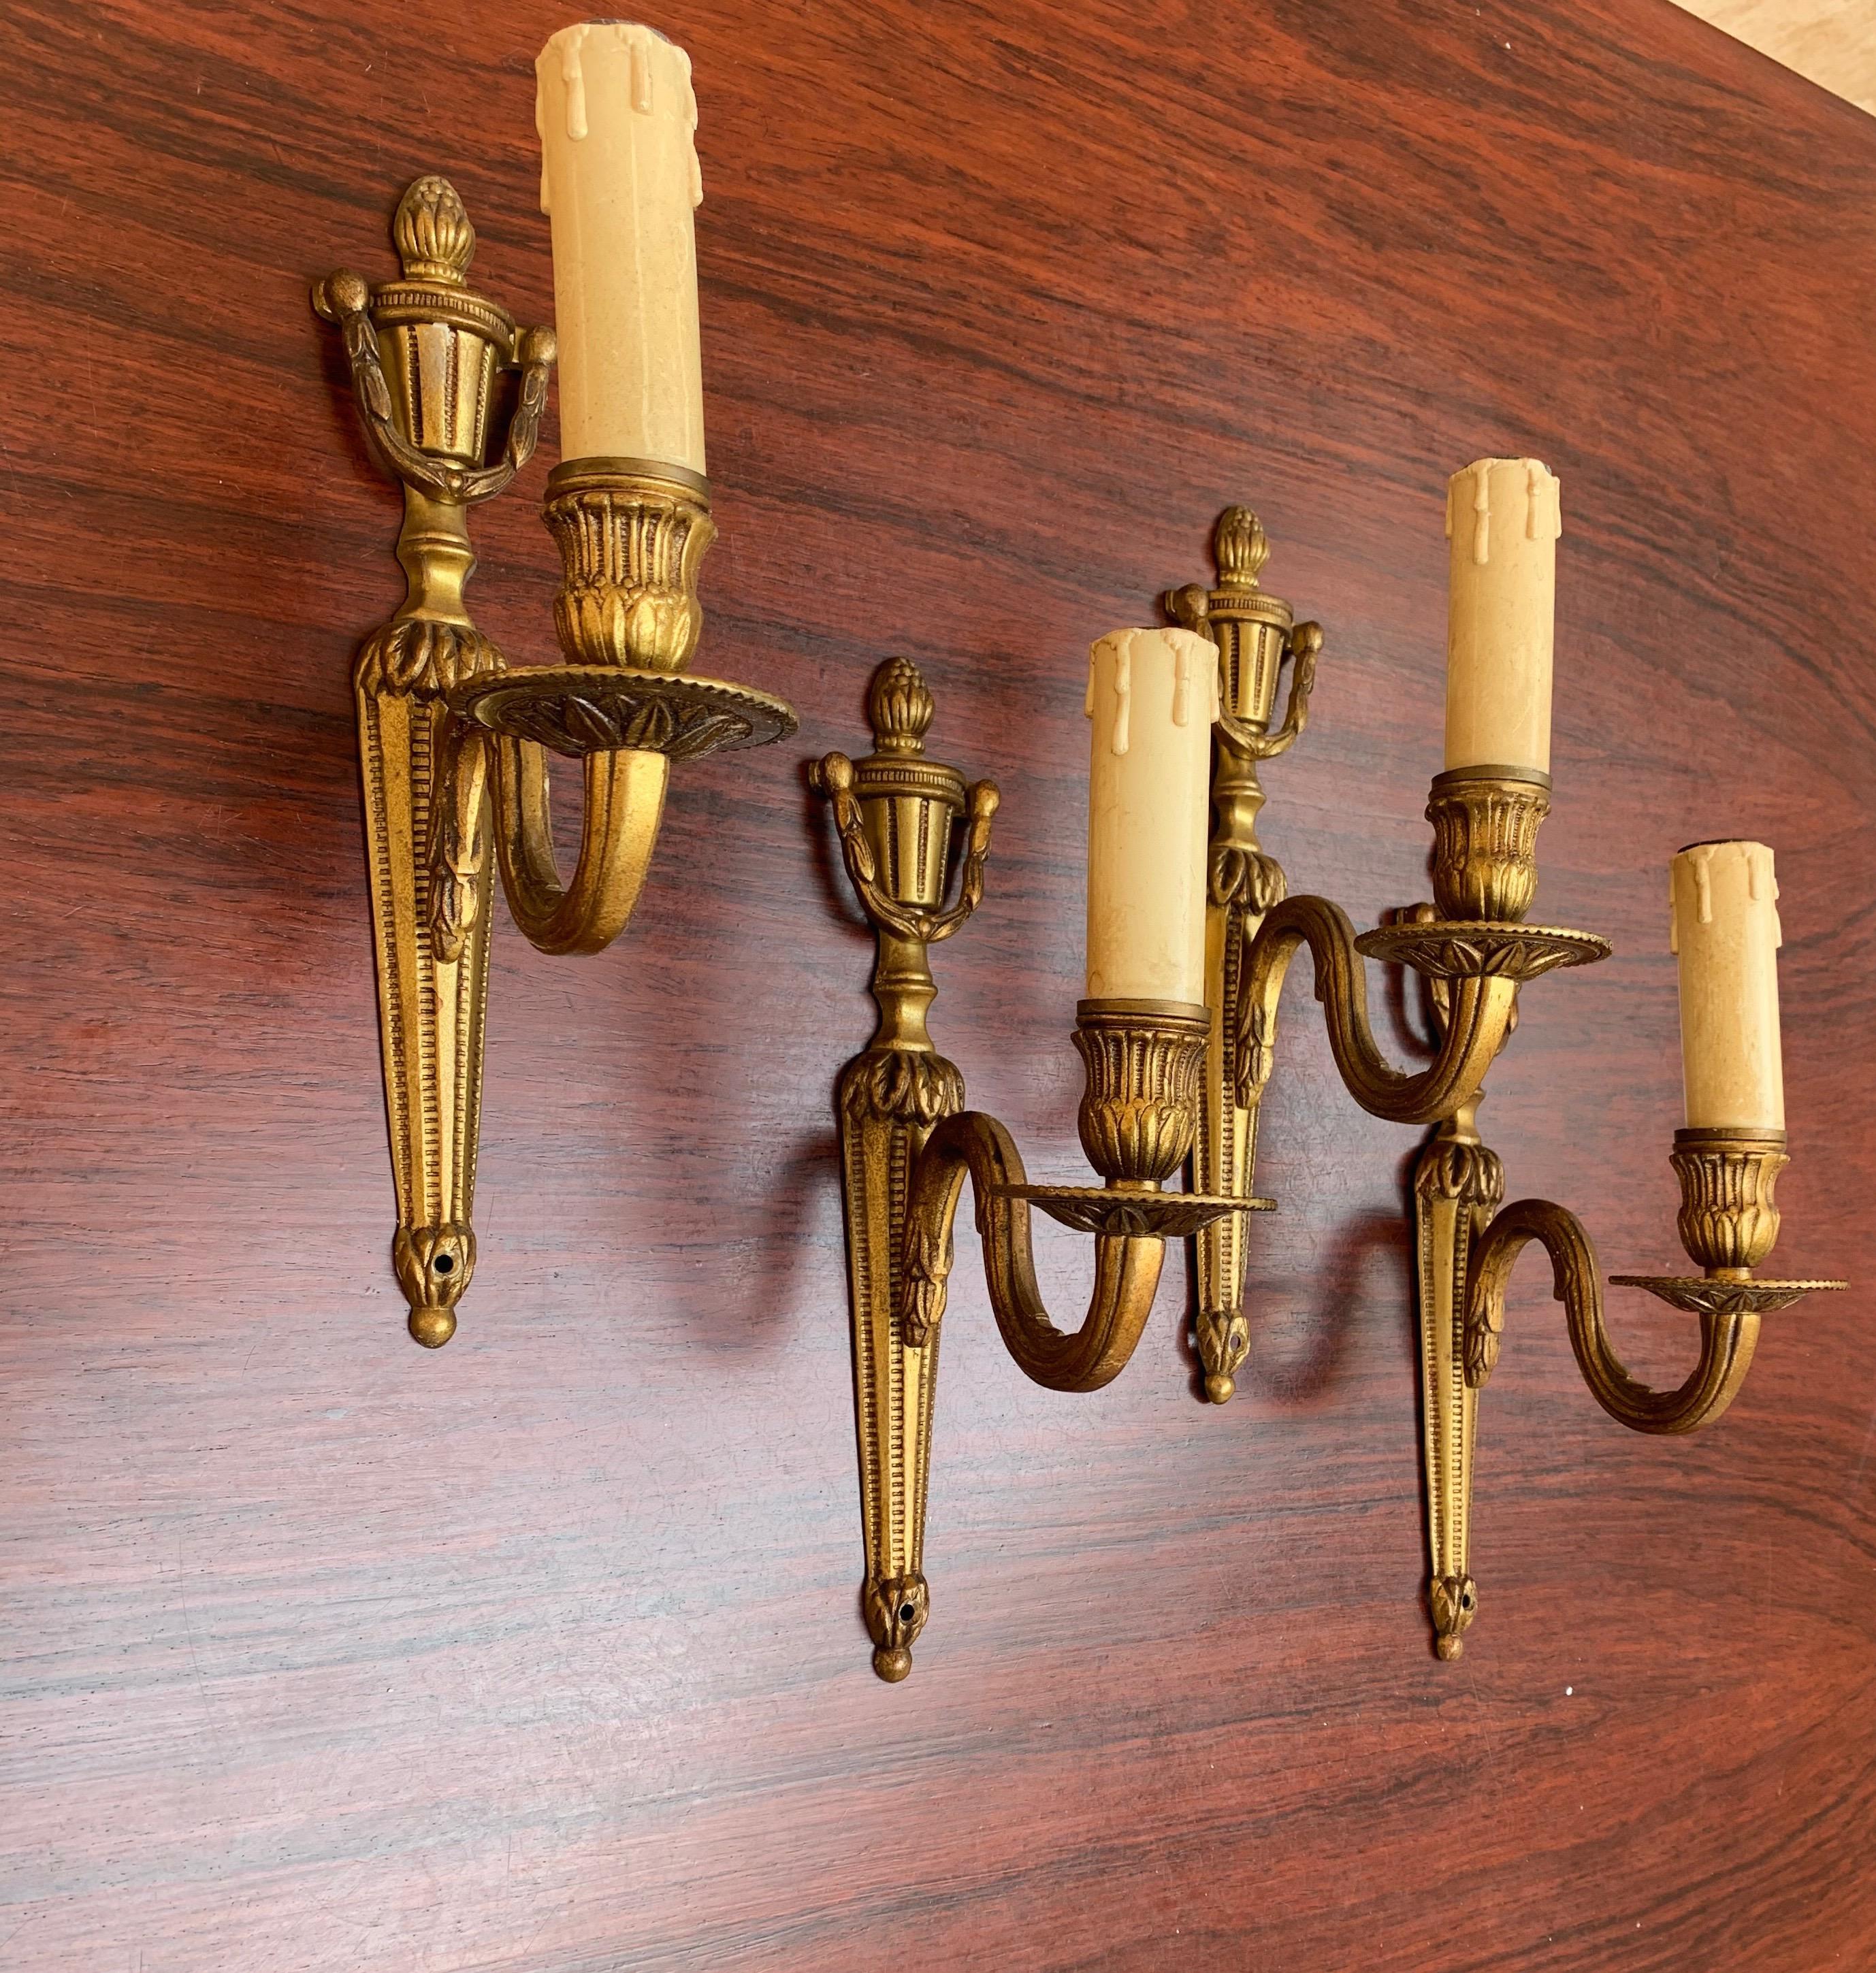 Stunning set of 4 excellent condition and all-handcrafted bronze wall lights.

Finding the right light fixtures for your interior can be a real Challenge, because you may feel uncertain about how they will look in your interior. Because of their